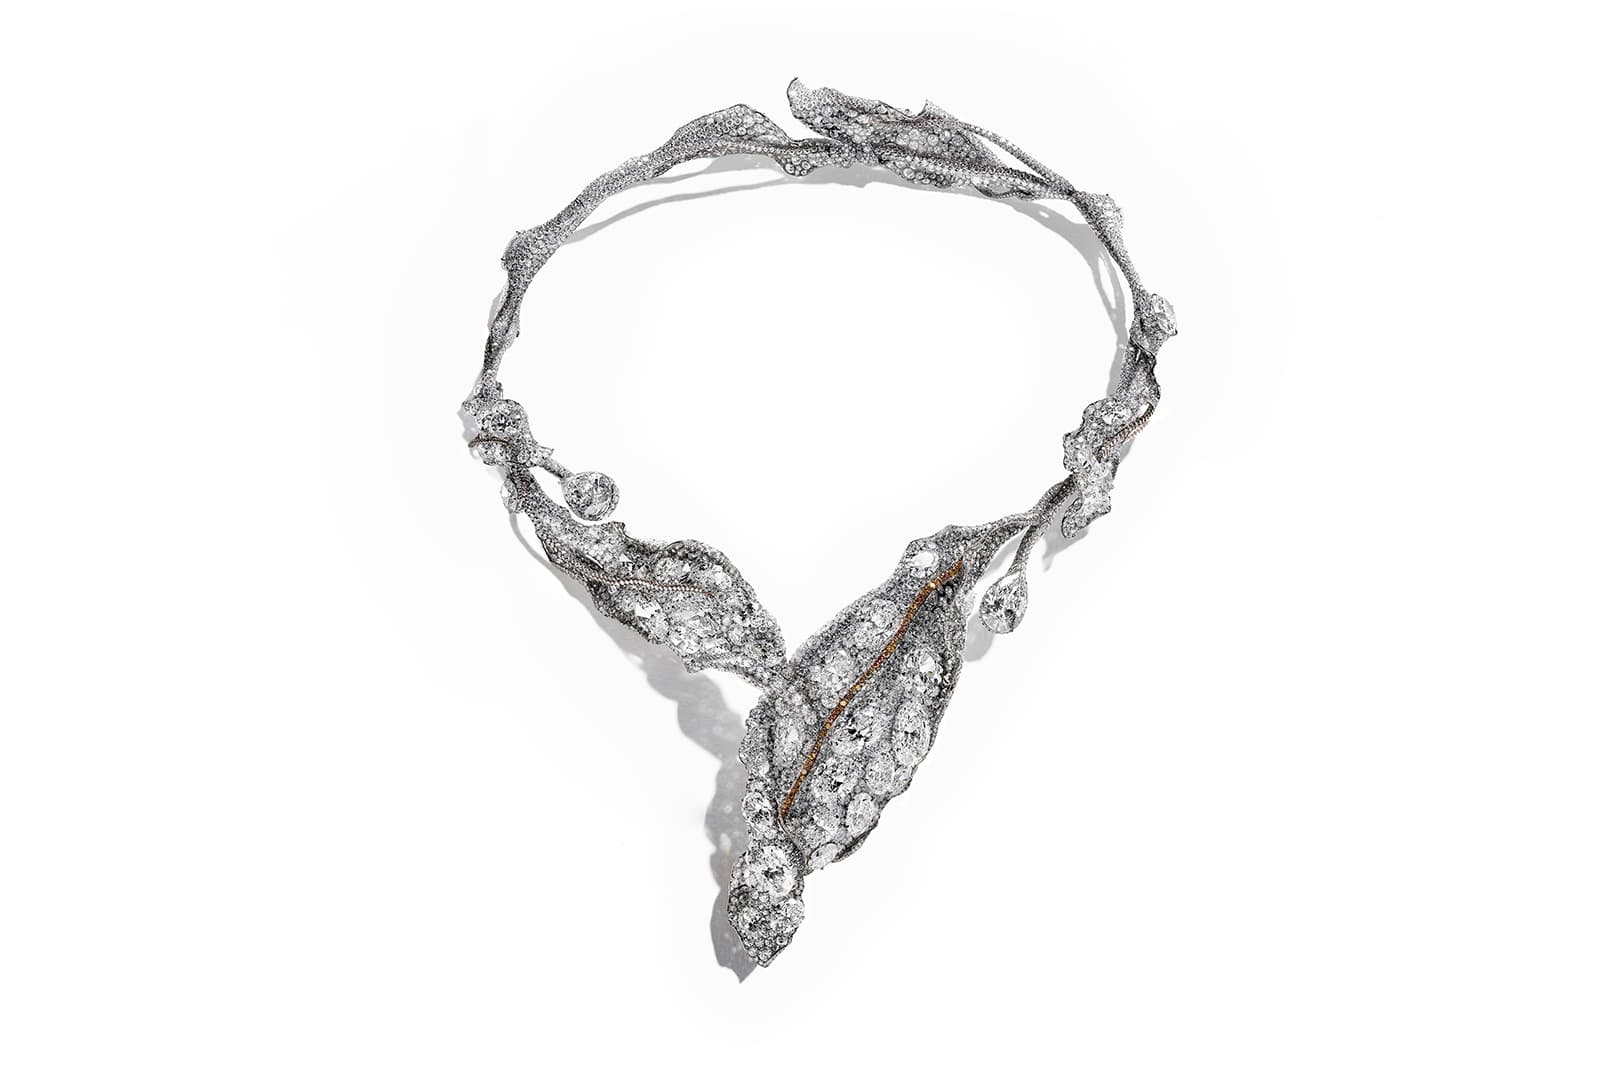 Cindy Chao 2016 Black Label Masterpiece IX Winter Leaves Necklace from the Four Seasons Collection with 12.06ct pear cut diamonds,  93.04ct of oval cut diamonds, accenting colourless and yellow diamonds in titanium